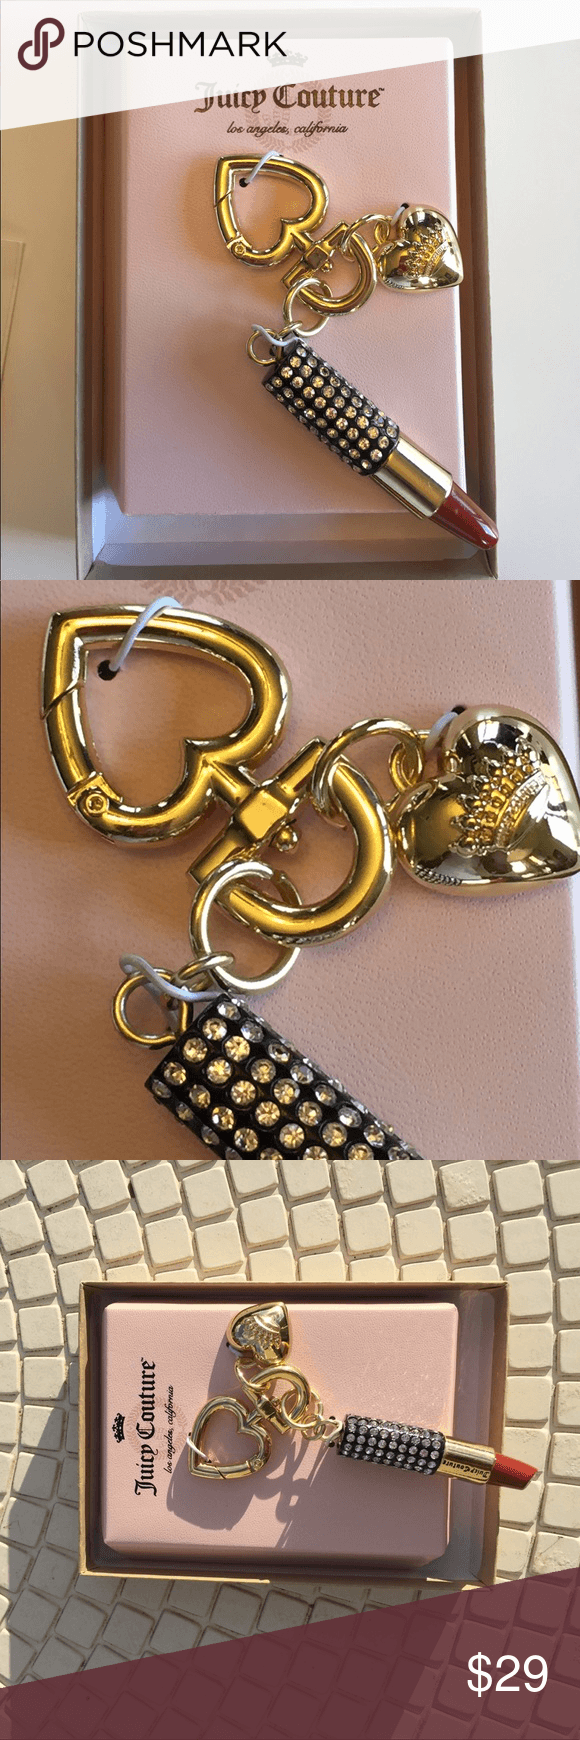 Juicy Couture Hearts Logo - New in box JUICY COUTURE HEARTS &lipstick keychain NWT